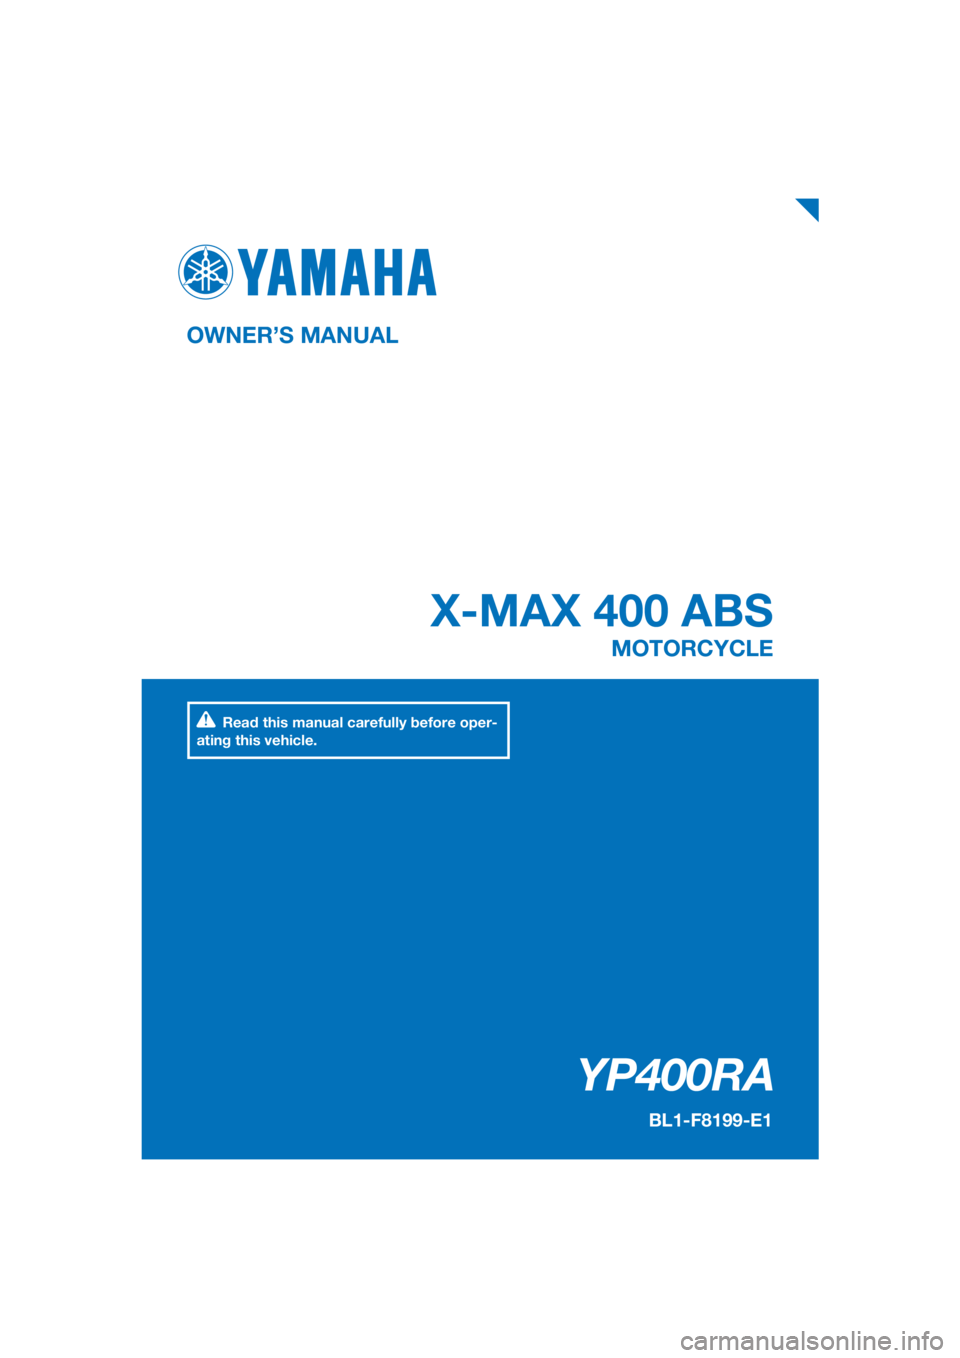 YAMAHA XMAX 400 2020  Owners Manual PANTONE285C
YP400RA
X-MAX 400 ABS
OWNER’S MANUAL
BL1-F8199-E1
MOTORCYCLE
[English  (E)]
Read this manual carefully before oper-
ating this vehicle. 